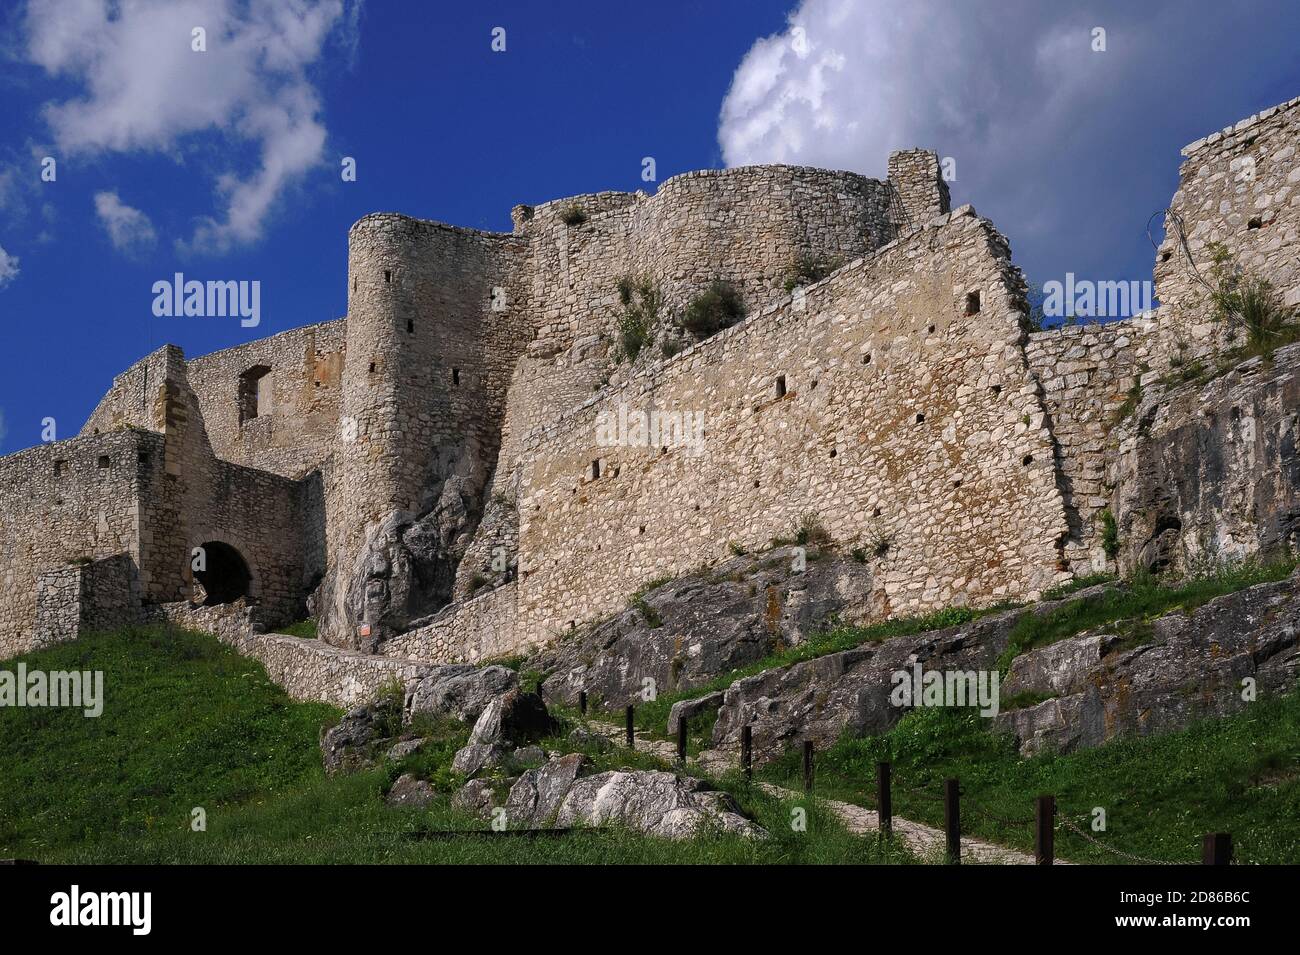 Spiš Castle (Spišský hrad), founded in the 1200s by Hungarian kings and now in the Košice Region of Slovakia.  It successfully repelled a Tartar siege in 1241 and grew to become Central Europe’s largest fortress complex.  Spiš was abandoned after a catastrophic fire in 1780, but a thorough restoration programme, launched in 1969, led to both the castle and its environs achieving UNESCO World Heritage Site status in 1993. Stock Photo